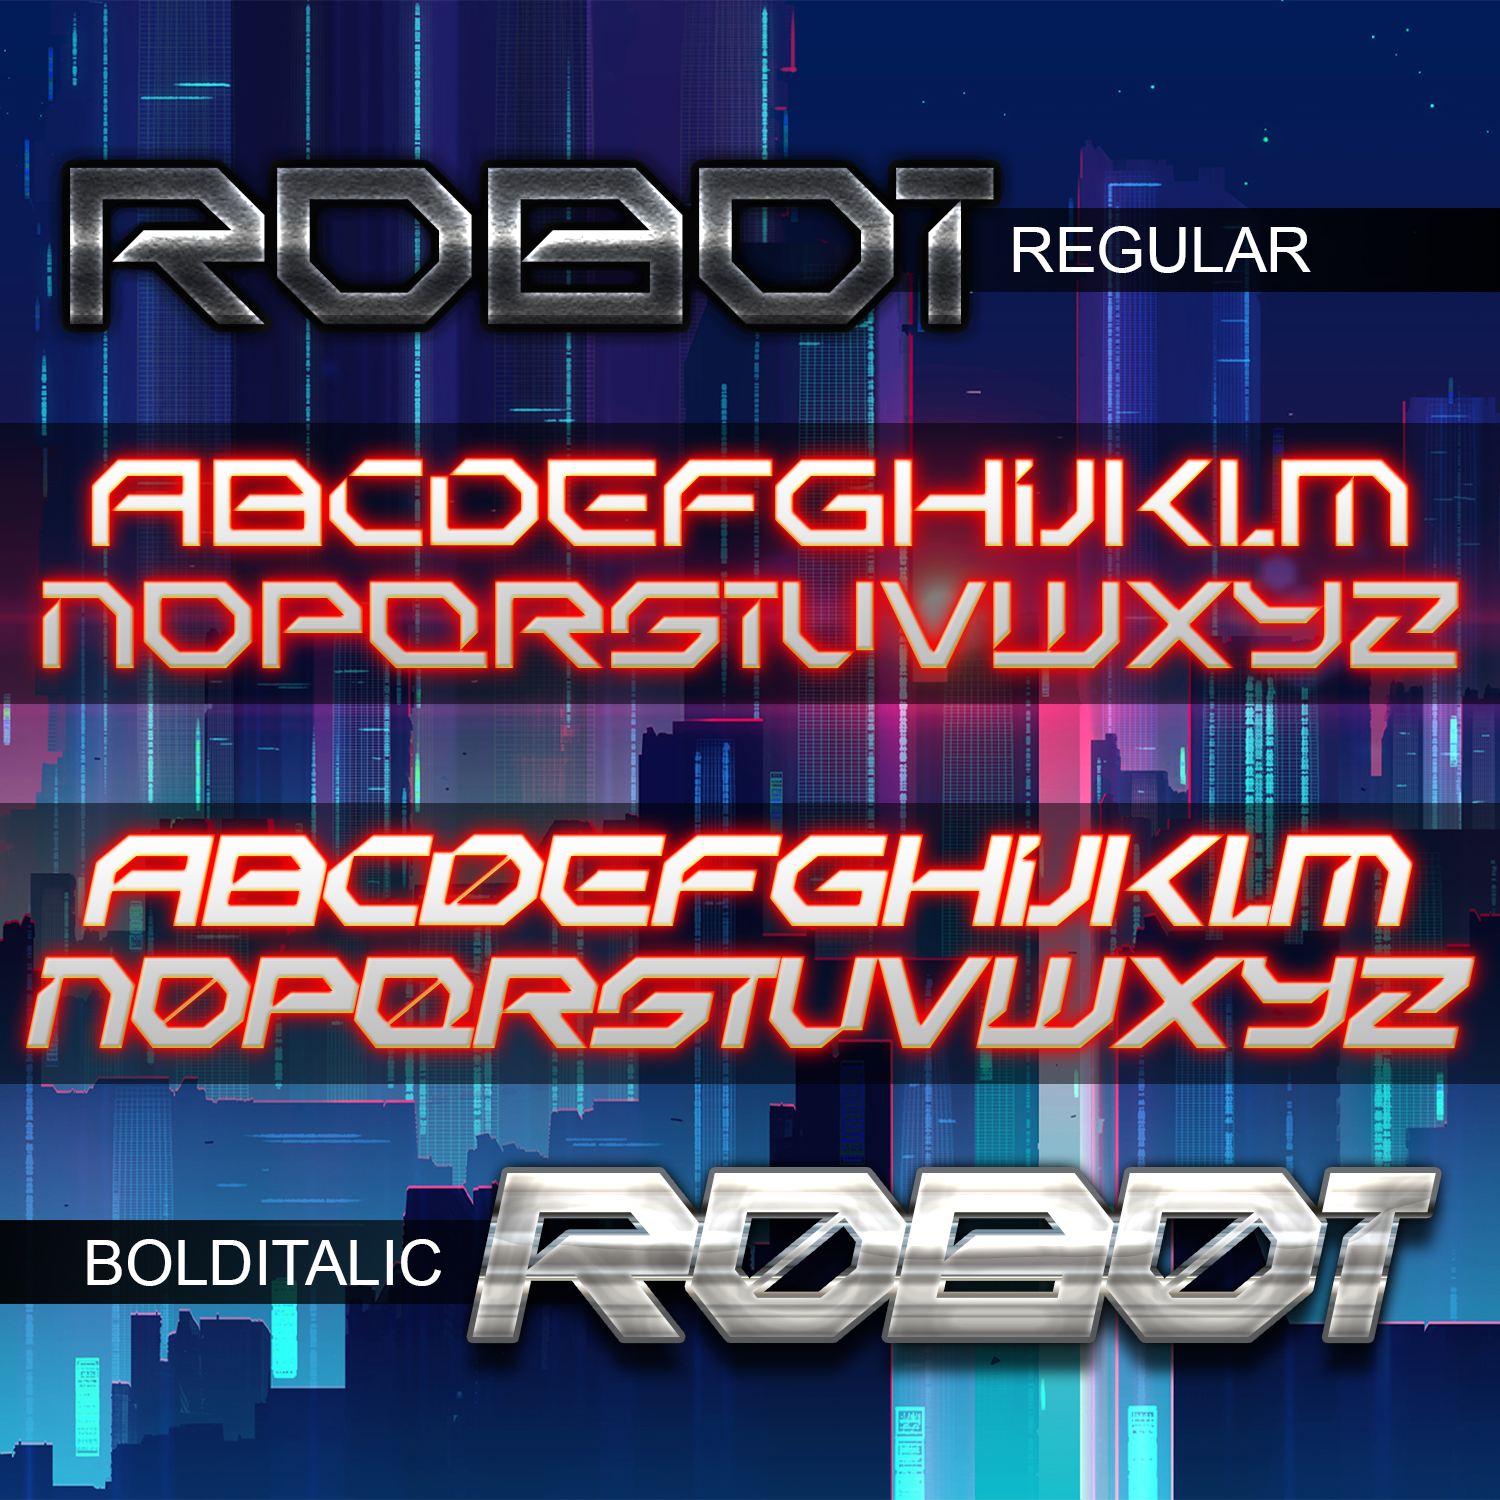 Cyberpunk style for font.